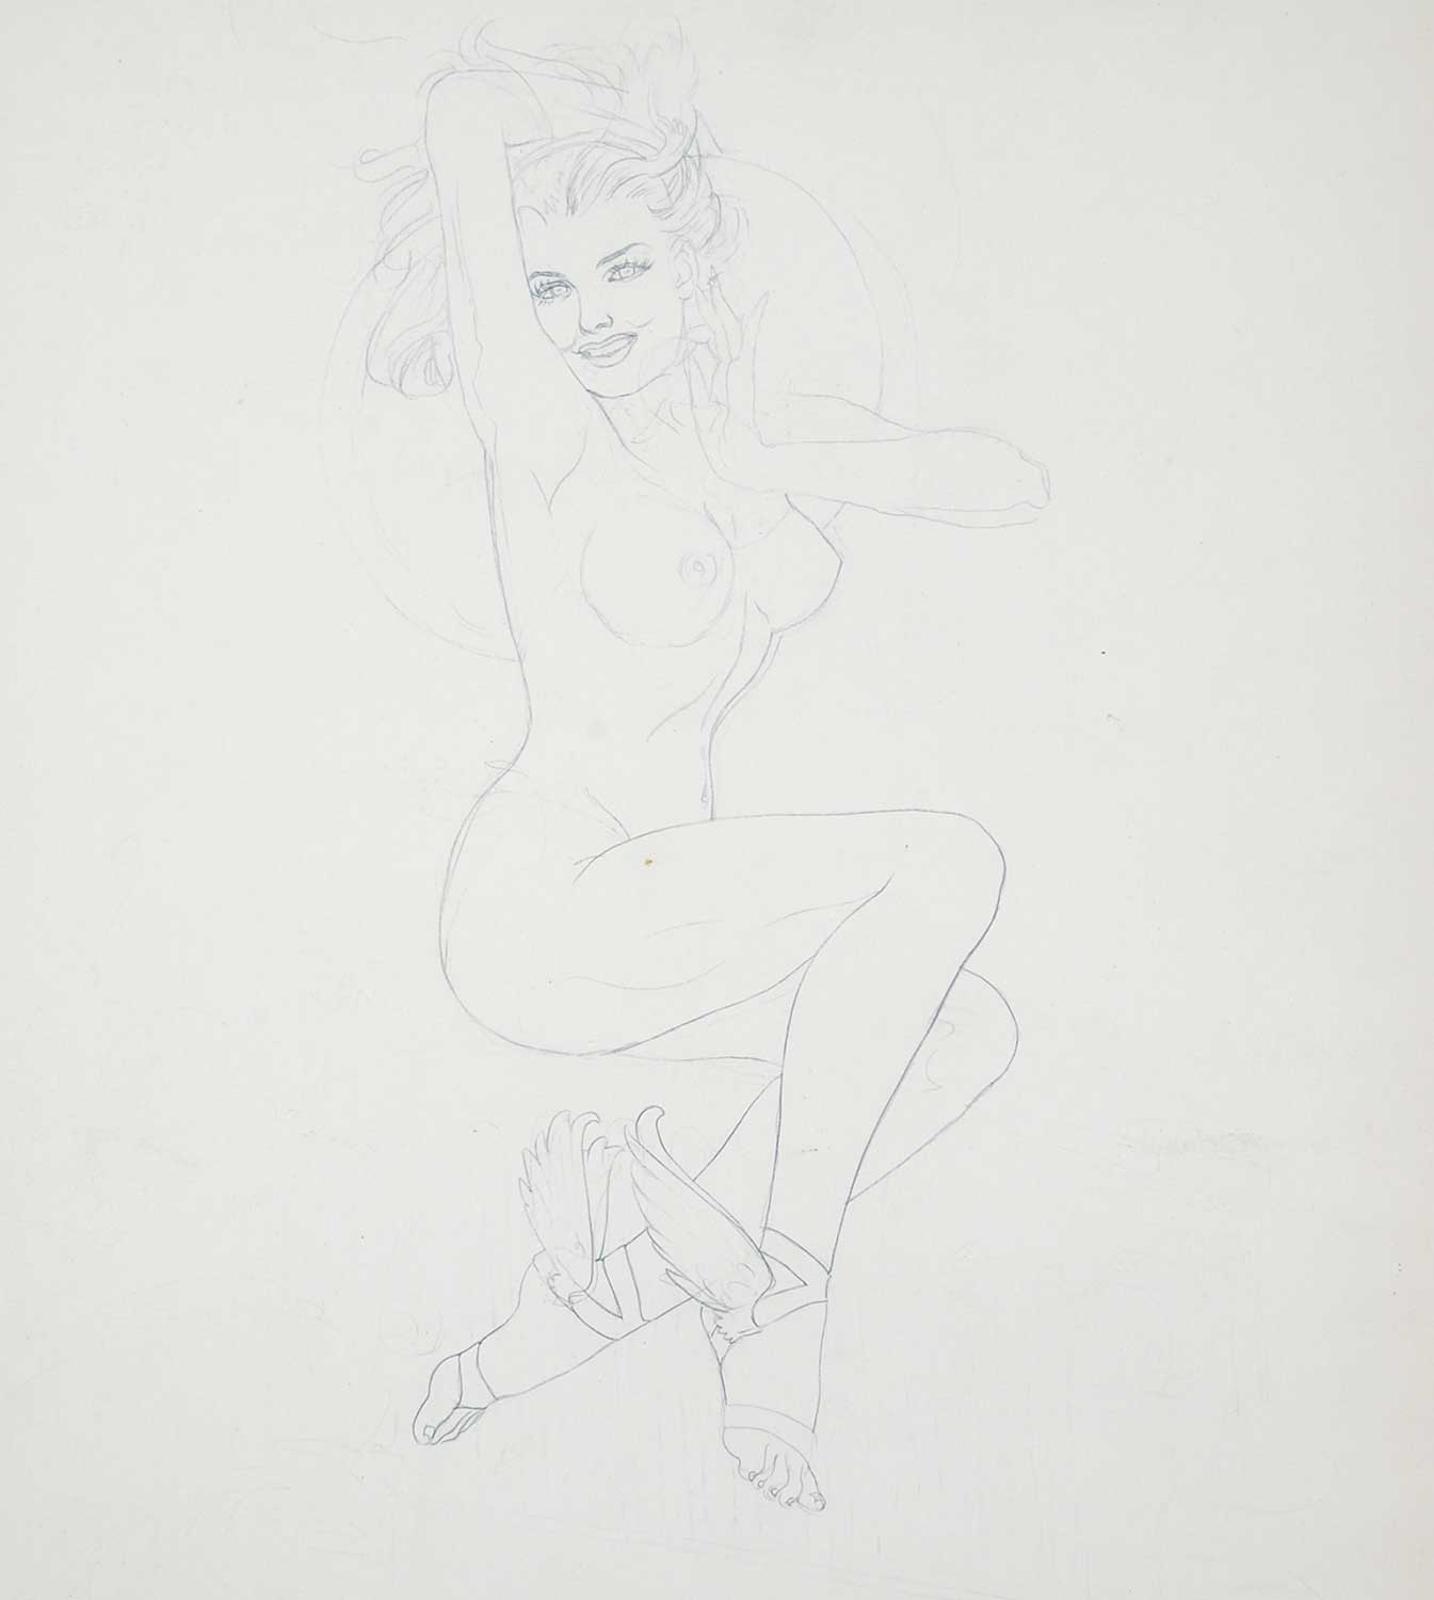 Untitled - Study of a Young Nude with Wings on Her Feet by artist Alberto Vargas